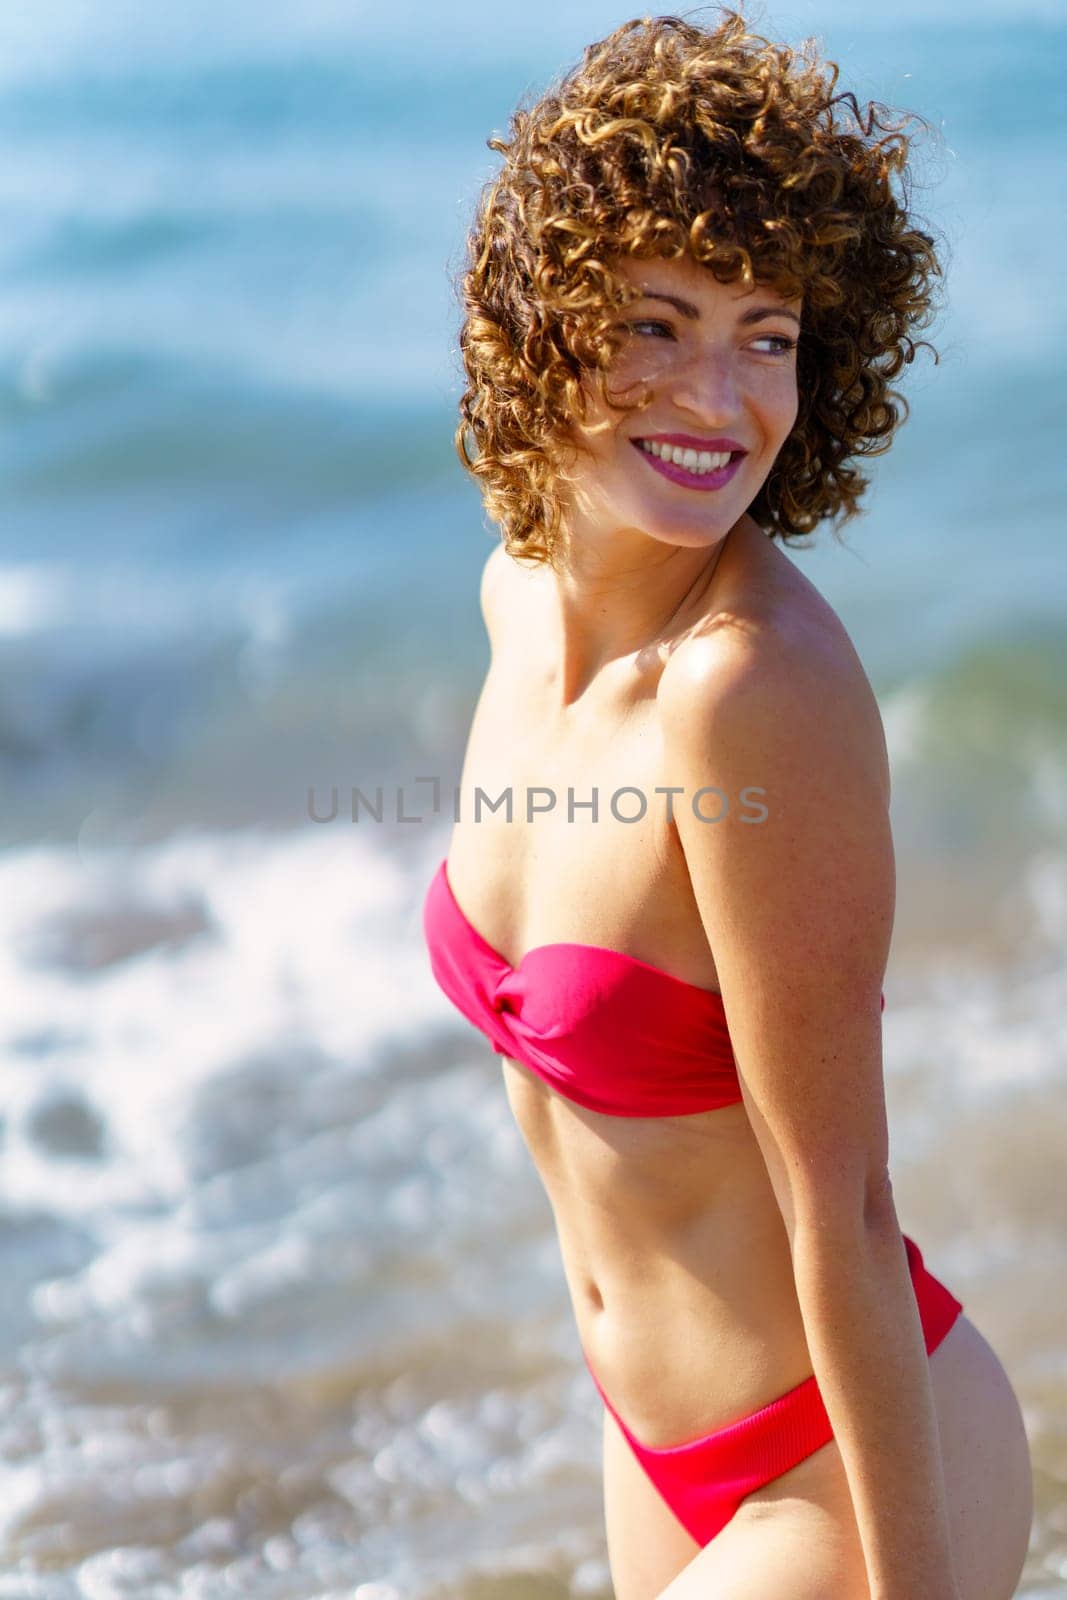 Side view of excited young female tourist with curly hair in stylish red bikini, smiling and looking over shoulder while standing on beach during summer vacation